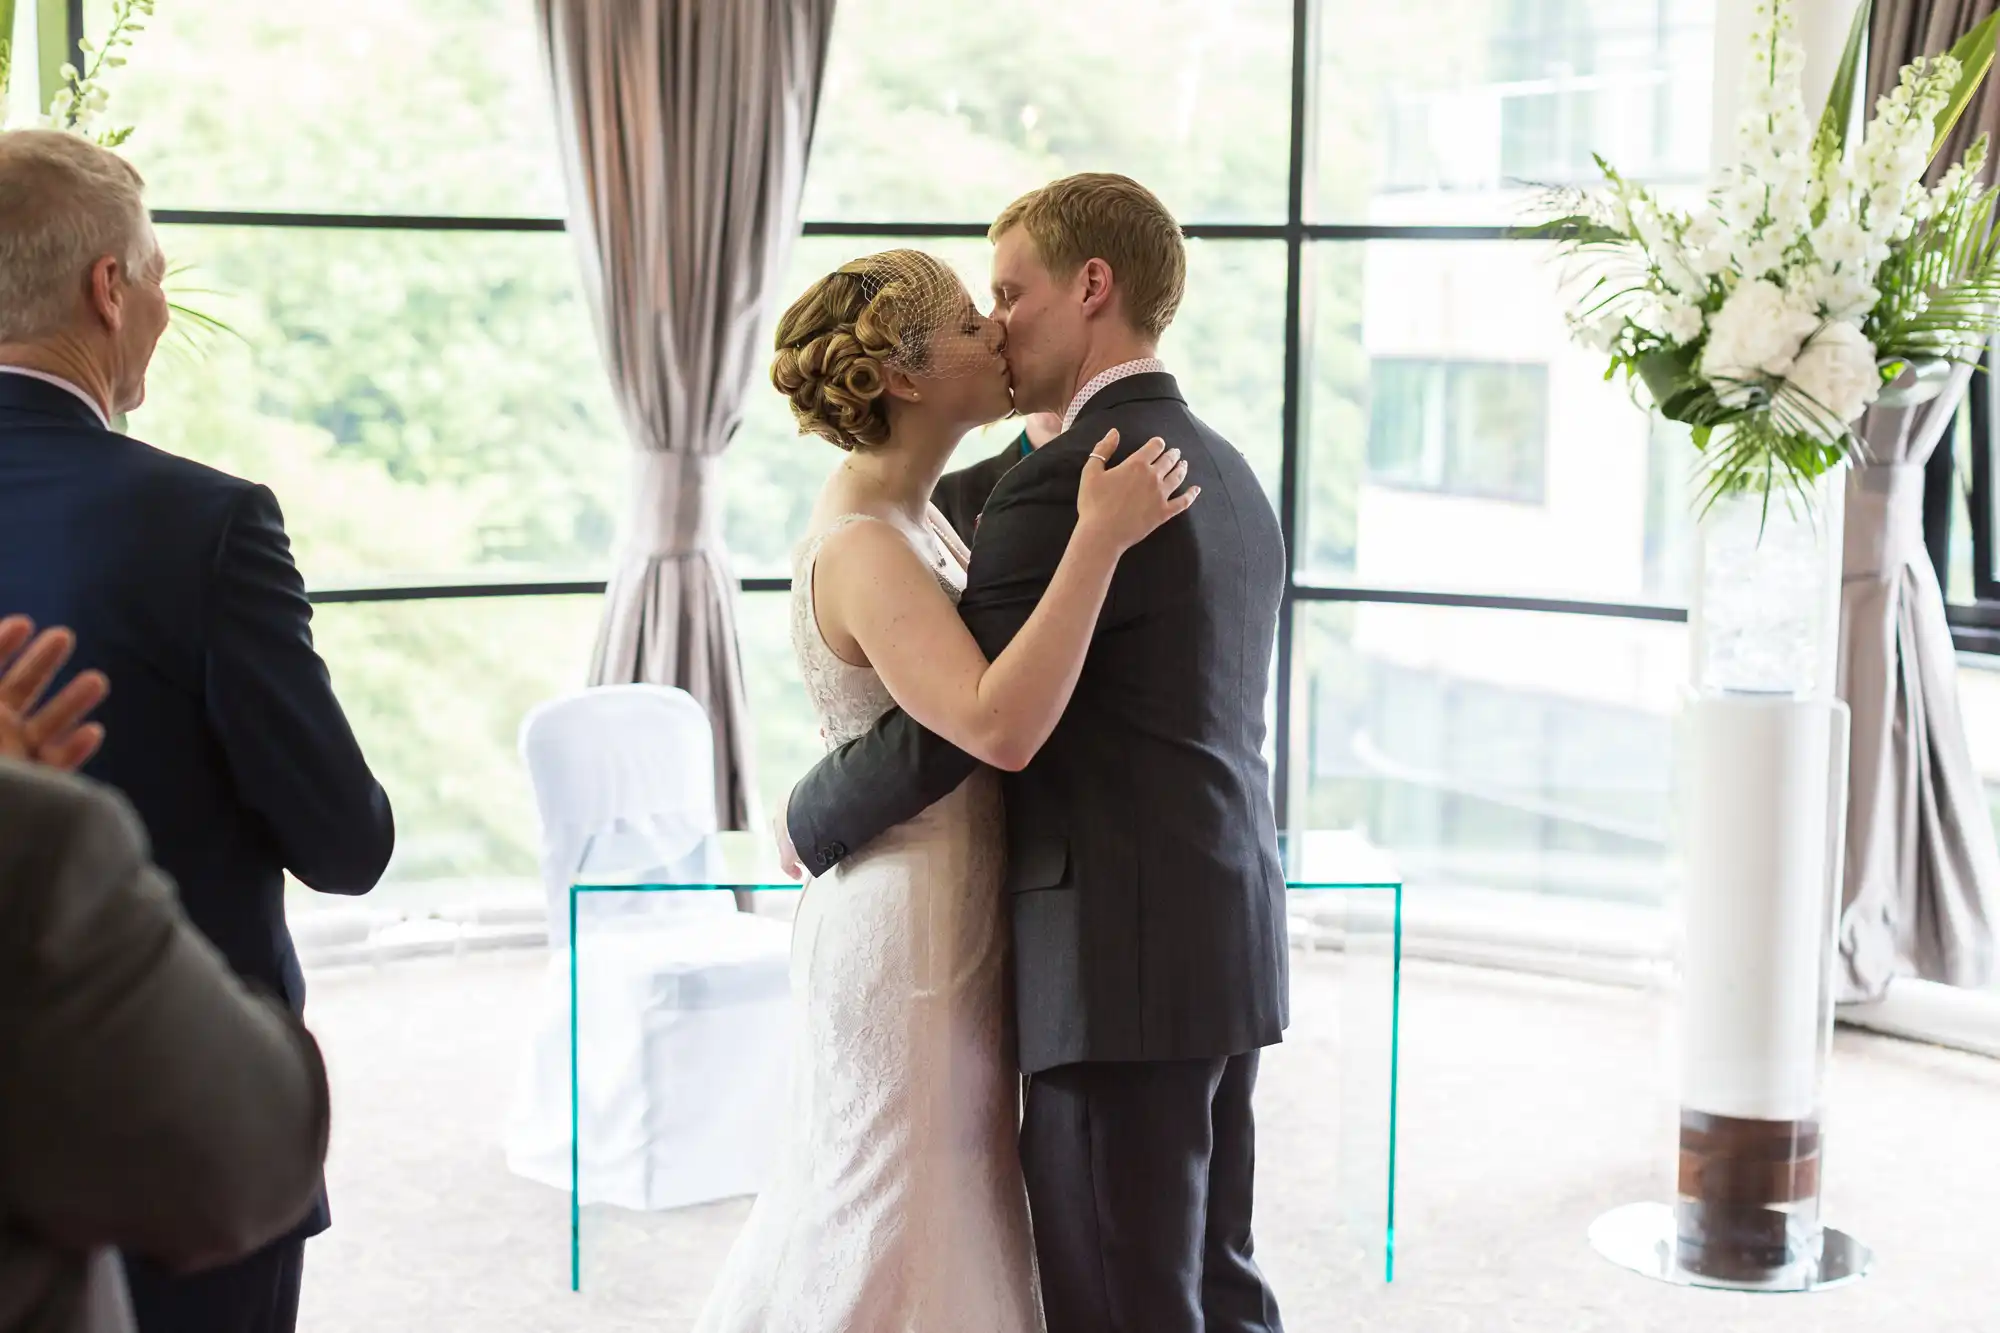 A bride and groom kissing at a wedding reception, surrounded by guests and large windows overlooking trees.